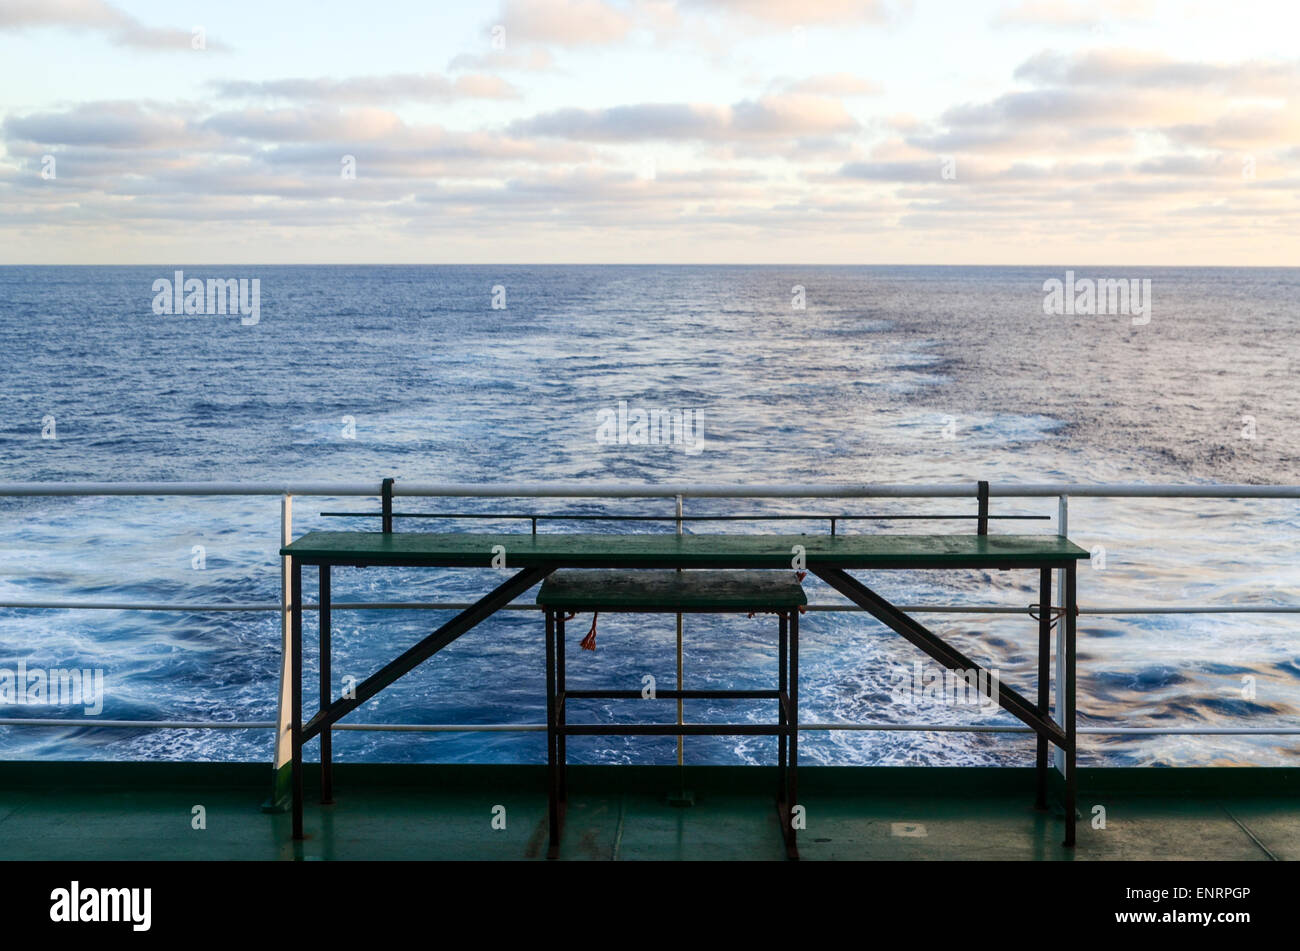 Freighter travel: empty table and trace of cargo ship in the open sea of the Atlantic ocean Stock Photo